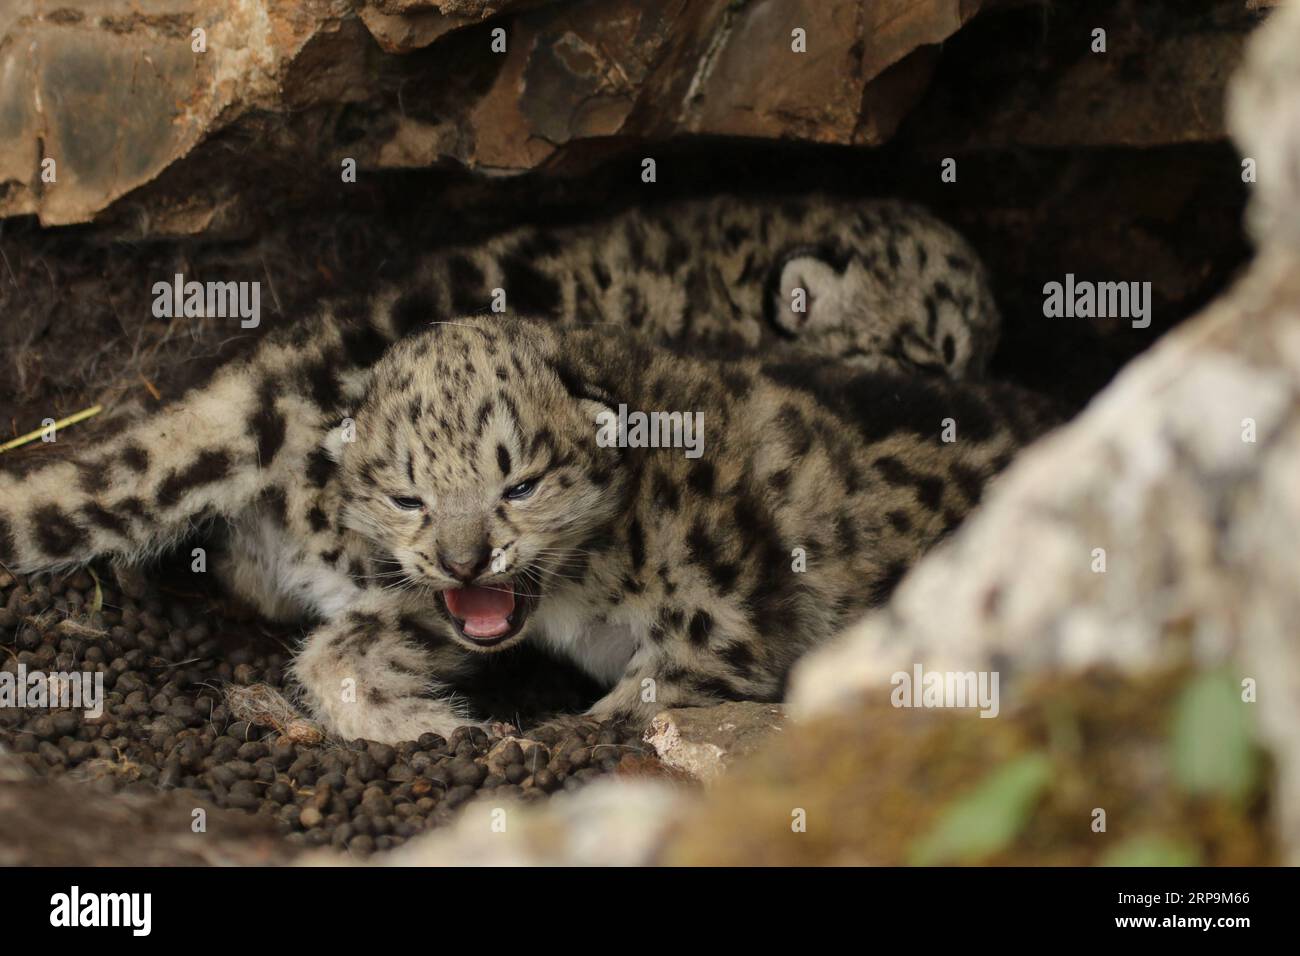 (190411) -- BEIJING, April 11, 2019 -- Photo taken on June 16, 2017 shows snow leopard cubs in bushes in Gaduo Township of Chengduo County under Yushu Tibetan Autonomous Prefecture, northwest China s Qinghai Province. Li Yuhan can still vividly remember when she encountered snow leopards two years ago at Sanjiangyuan, meaning source for three rivers, in northwest China s Qinghai Province. I was with a scientific survey team, and we were heading toward a mountain top in Namsel Township of Yushu Tibetan Autonomous Prefecture, said Li, a student of Peking University. I saw seven snow leopards on Stock Photo